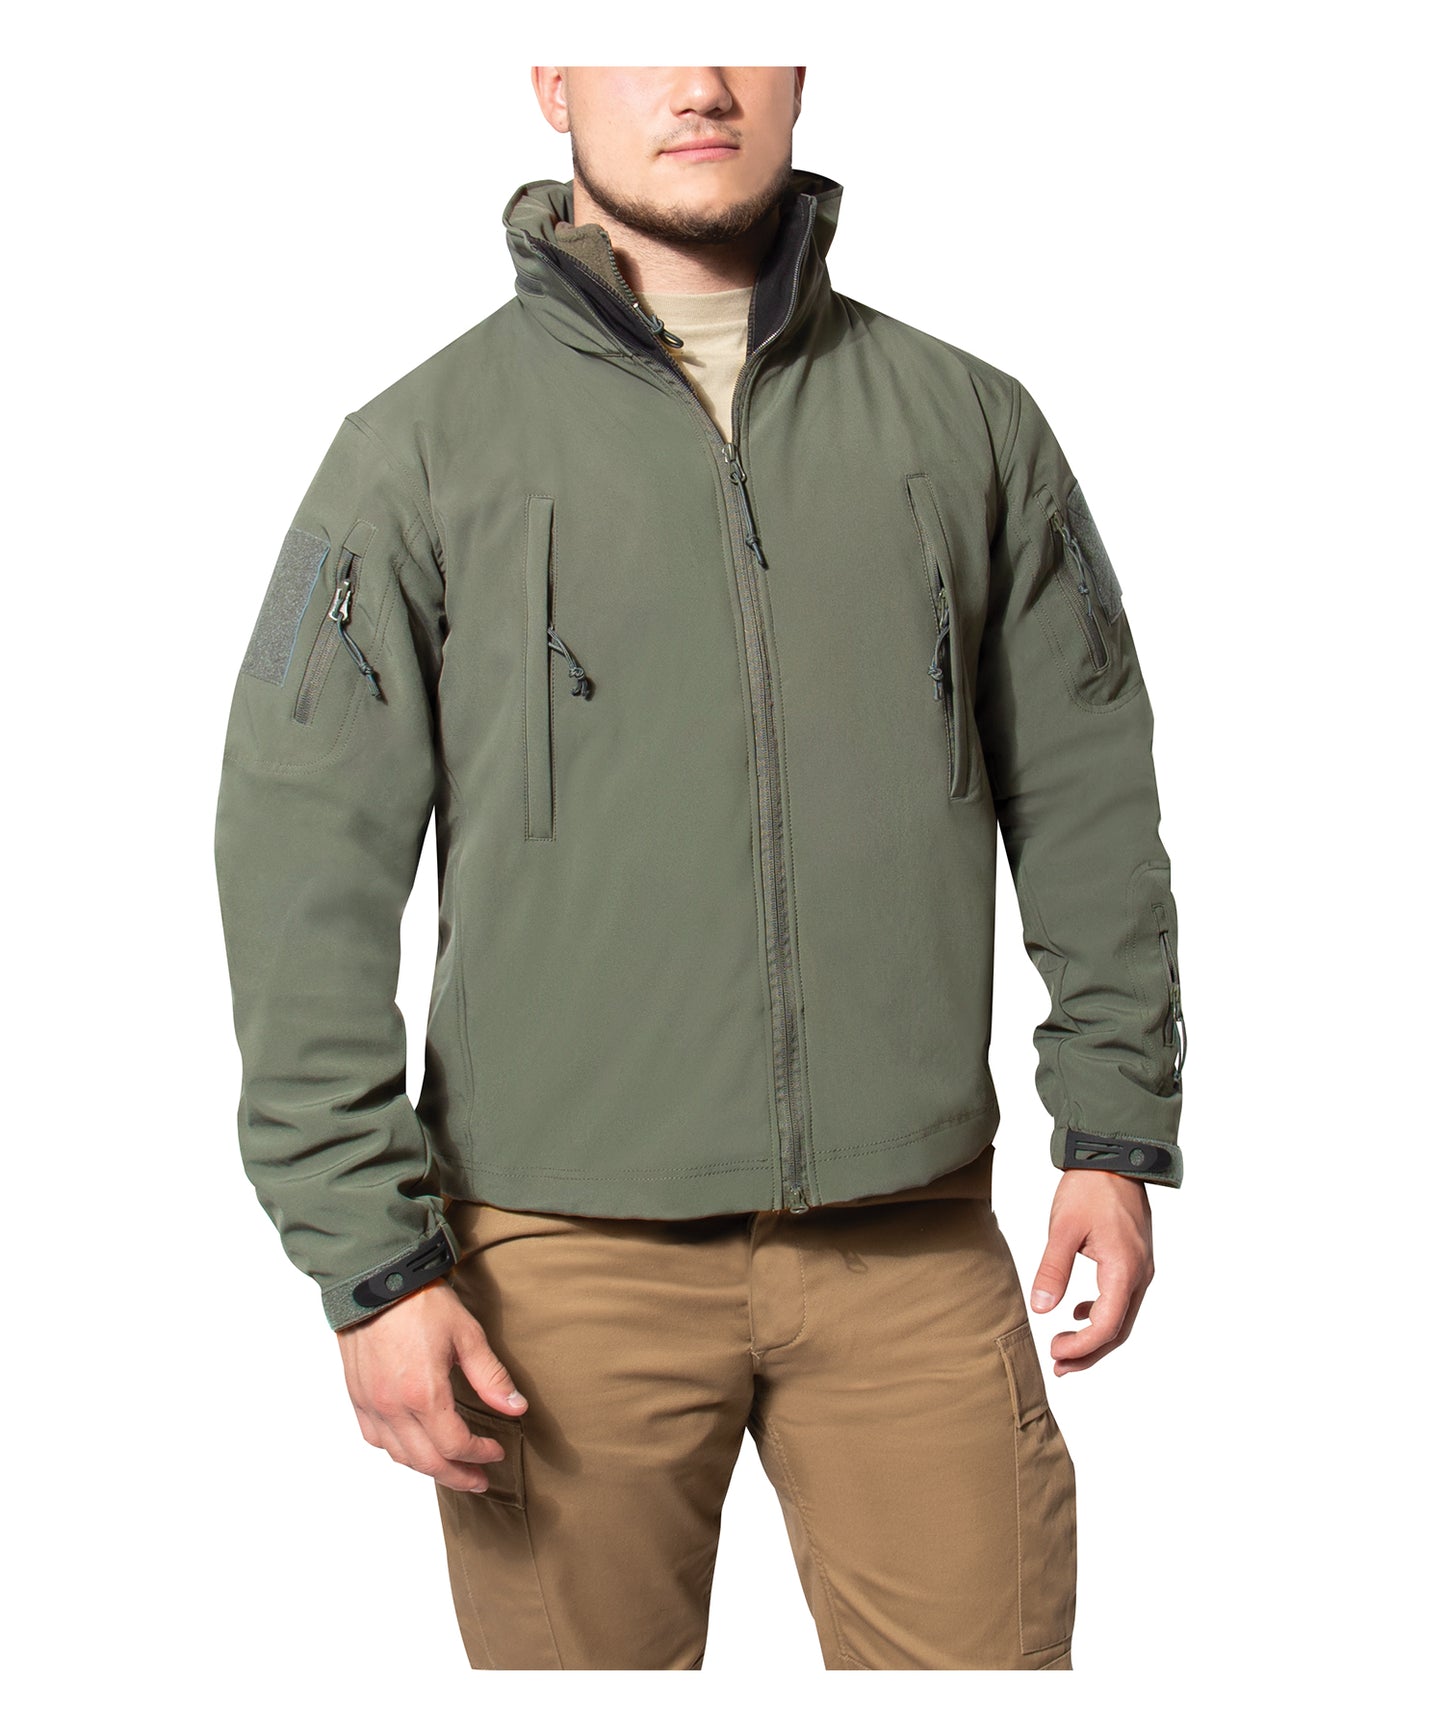 Milspec 3-in-1 Spec Ops Soft Shell Jacket Soft Shell Jackets MilTac Tactical Military Outdoor Gear Australia